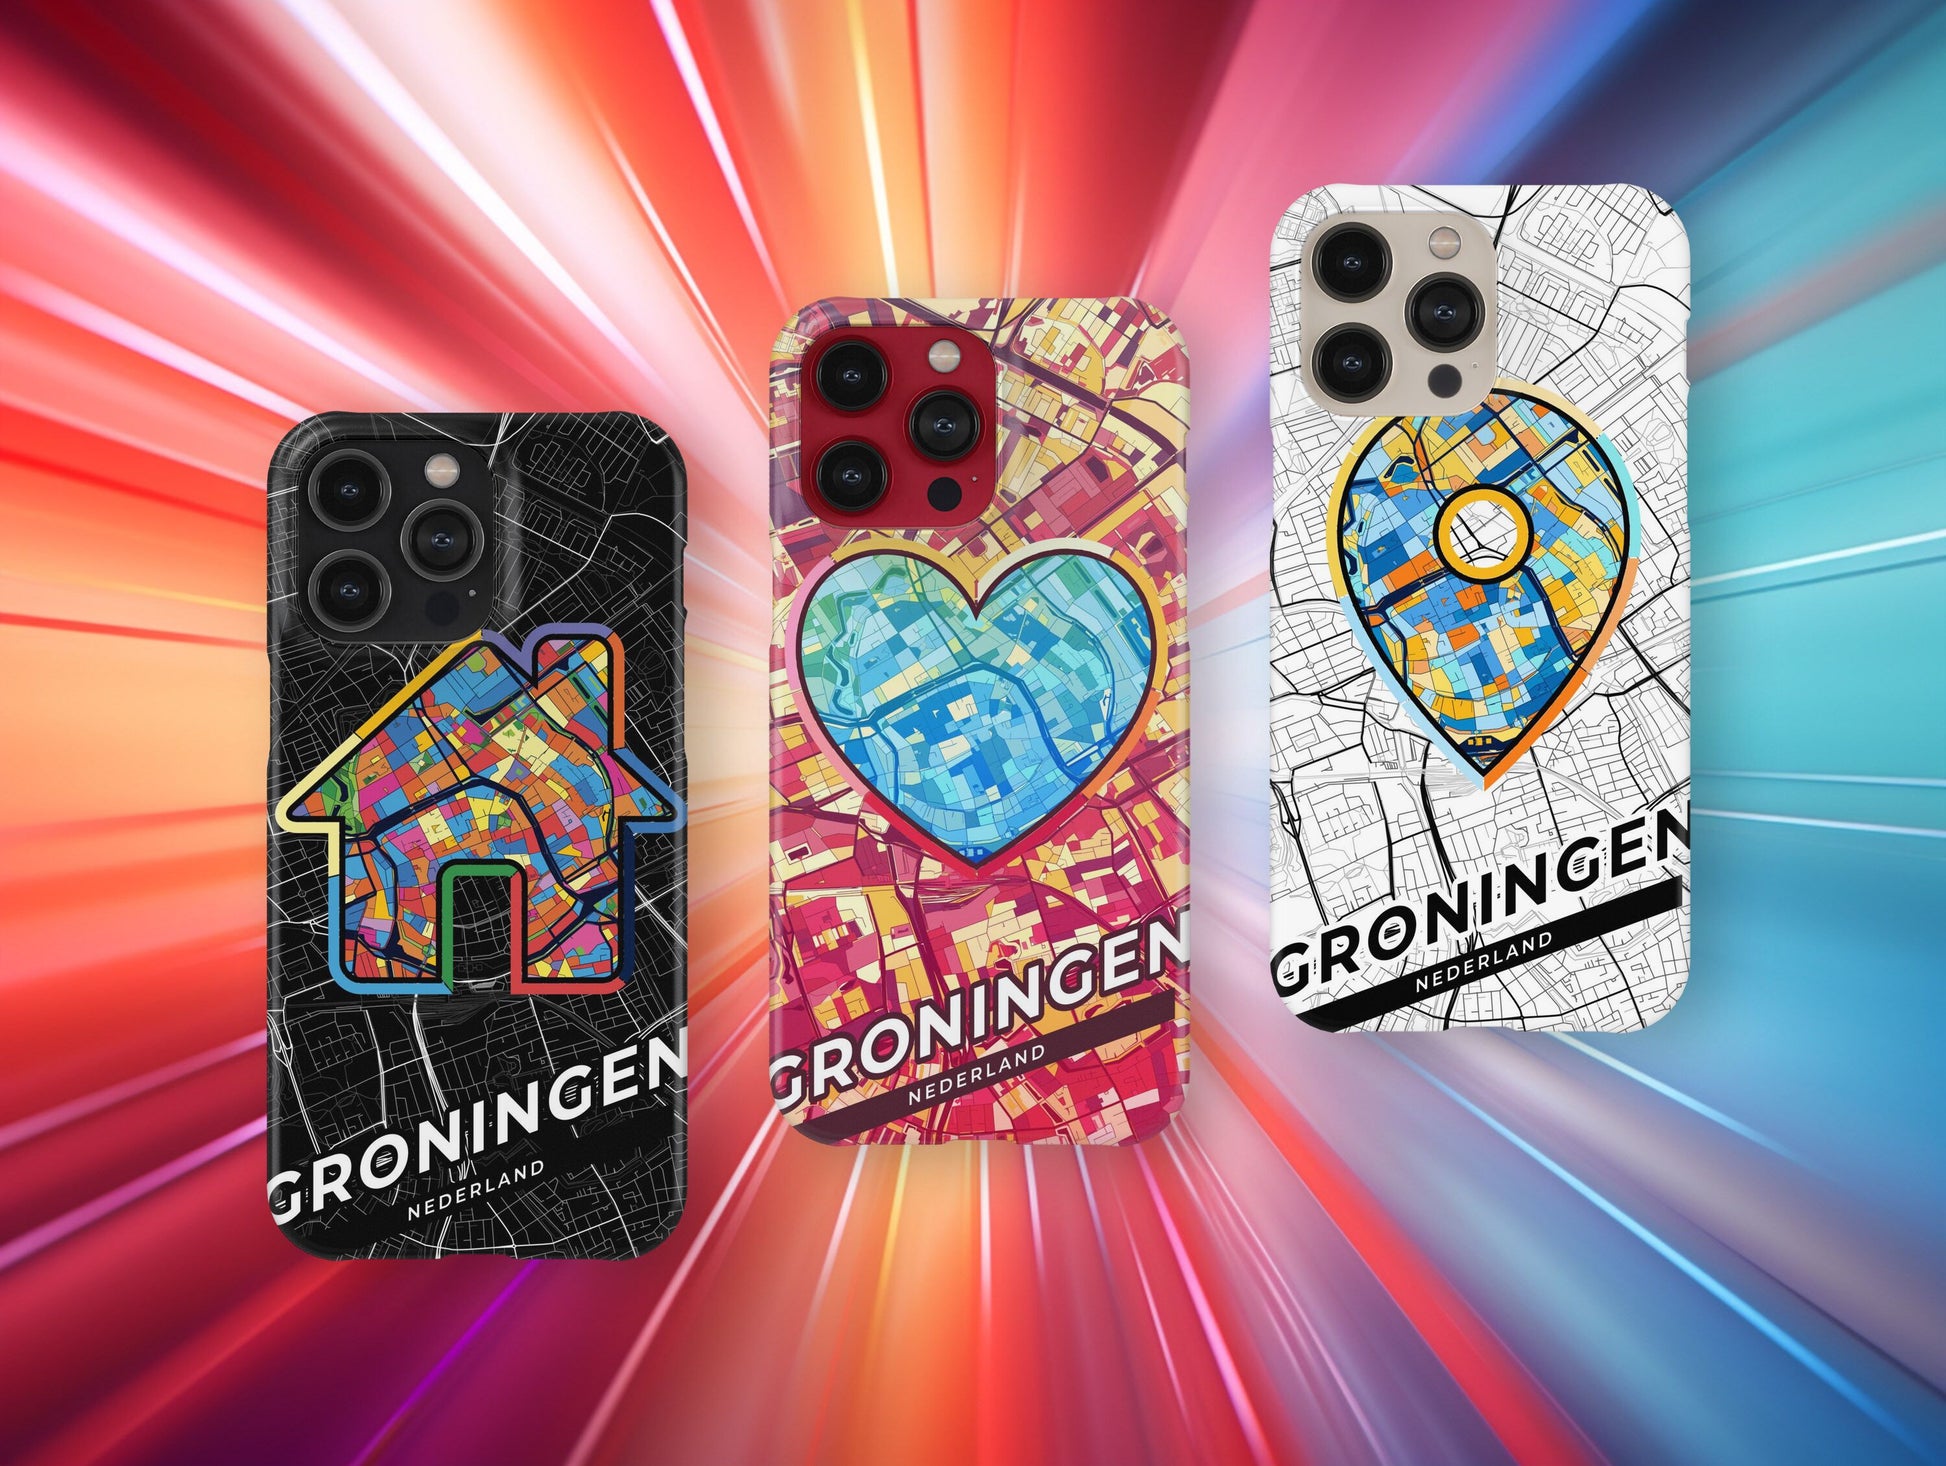 Groningen Netherlands slim phone case with colorful icon. Birthday, wedding or housewarming gift. Couple match cases.